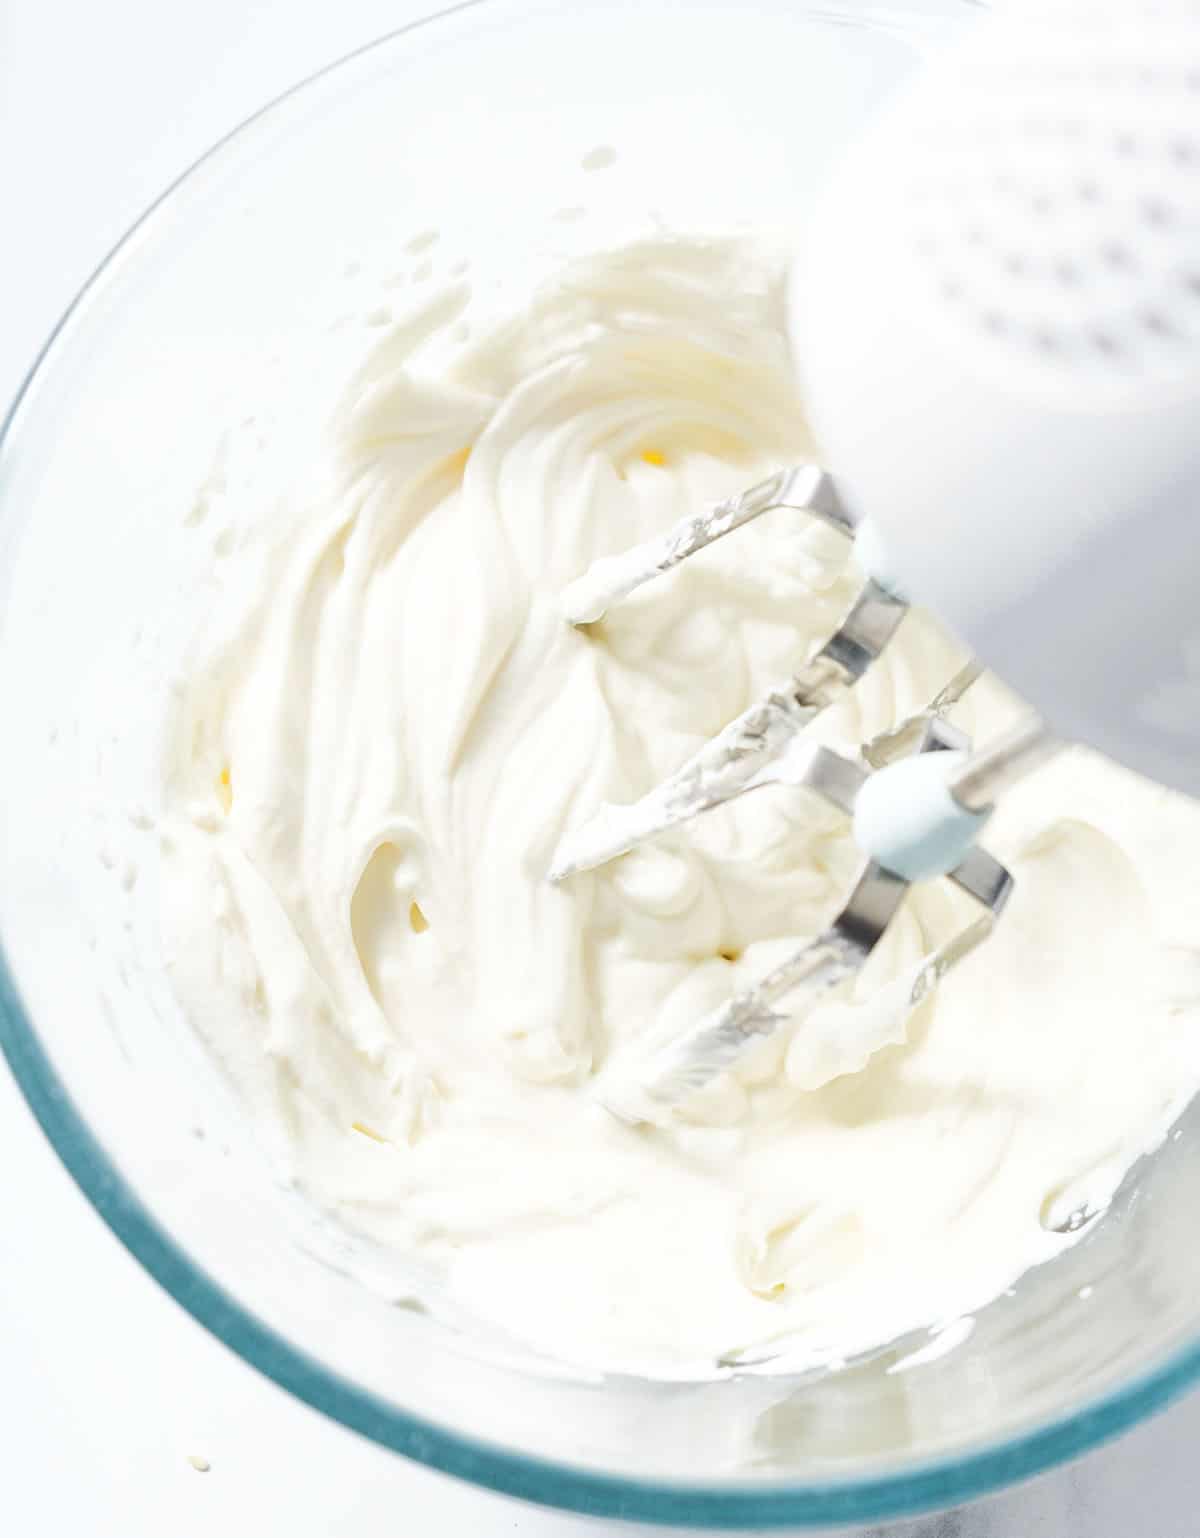 An electric hand beater beating cream cheese in a glass bowl over a white background.